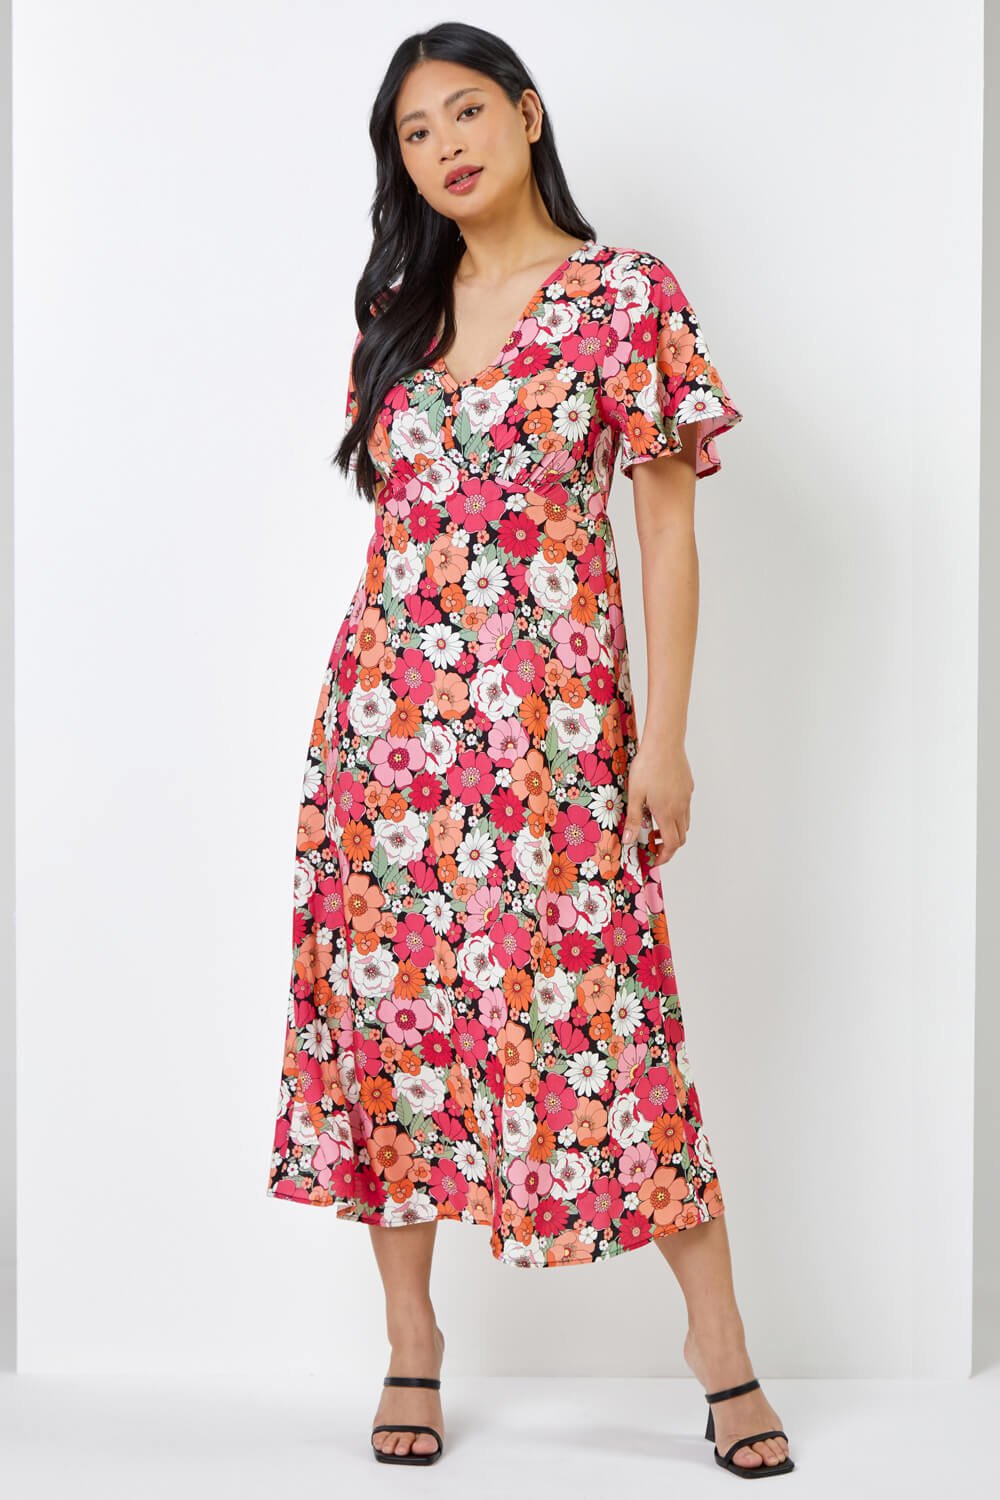 CORAL Petite Floral Print Flute Sleeve Dress, Image 1 of 5